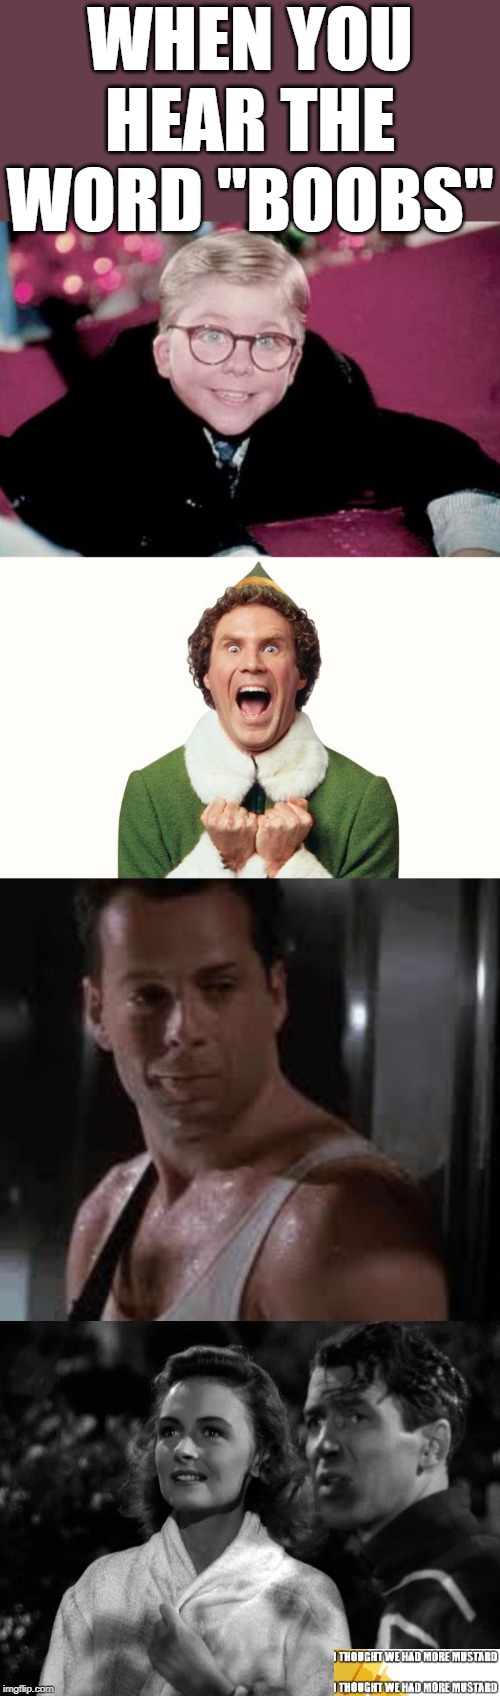 Christmas Boobs | WHEN YOU HEAR THE WORD "BOOBS" | image tagged in ralphie from a christmas story,buddy the elf excited | made w/ Imgflip meme maker